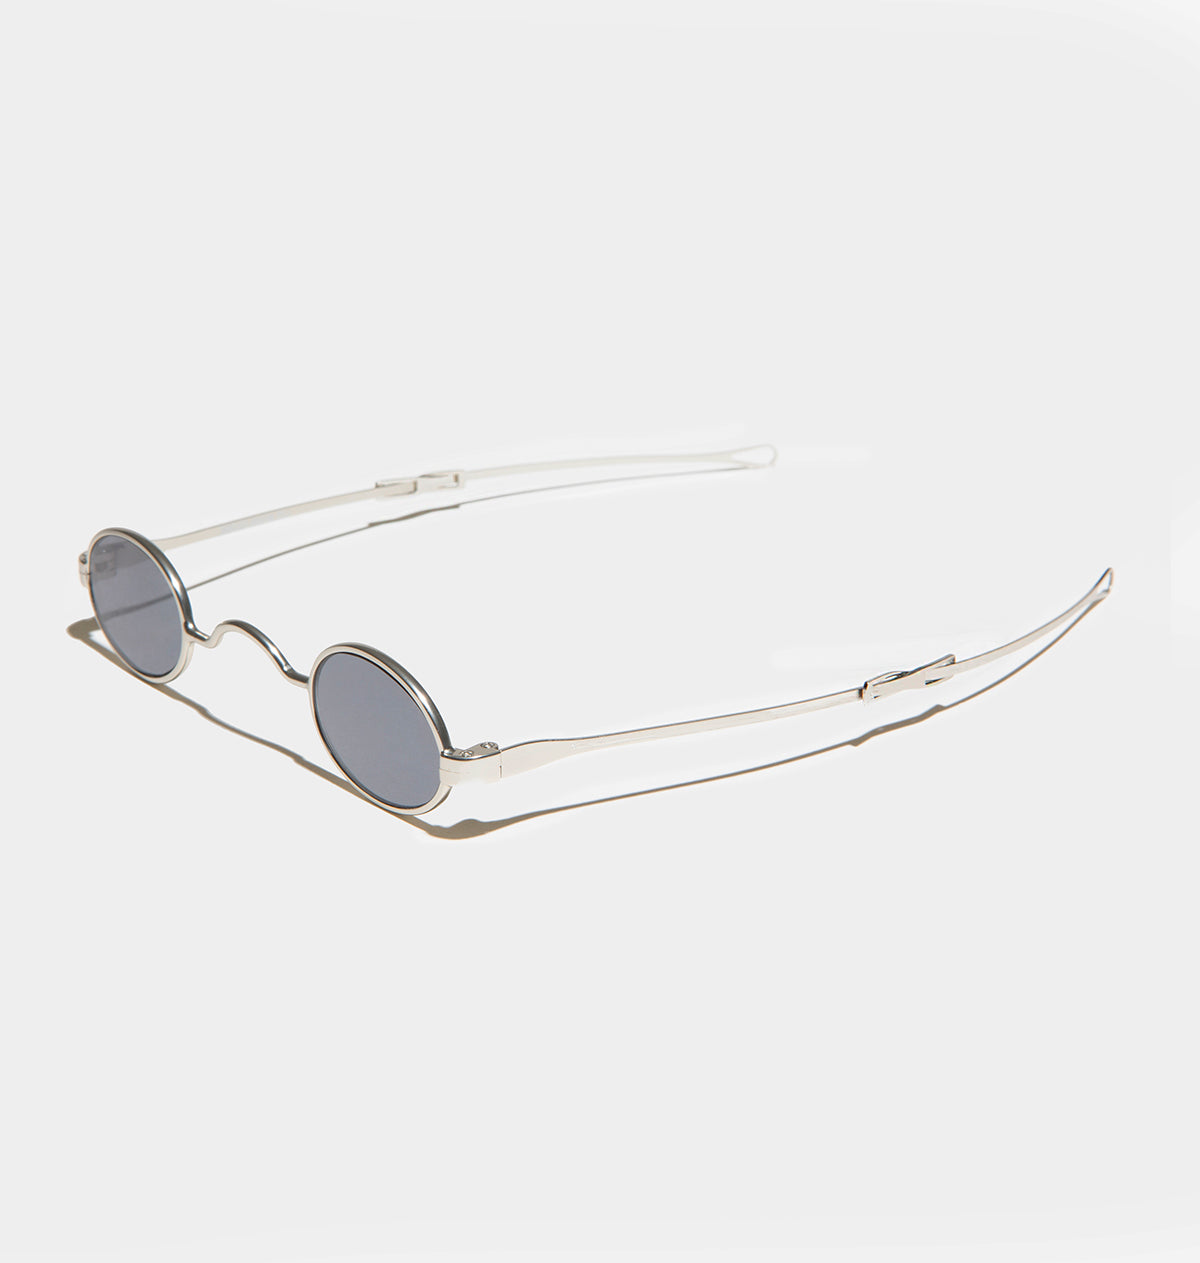 Tiny Oval Spectacle Sunglass with Sliding Temples - Eli